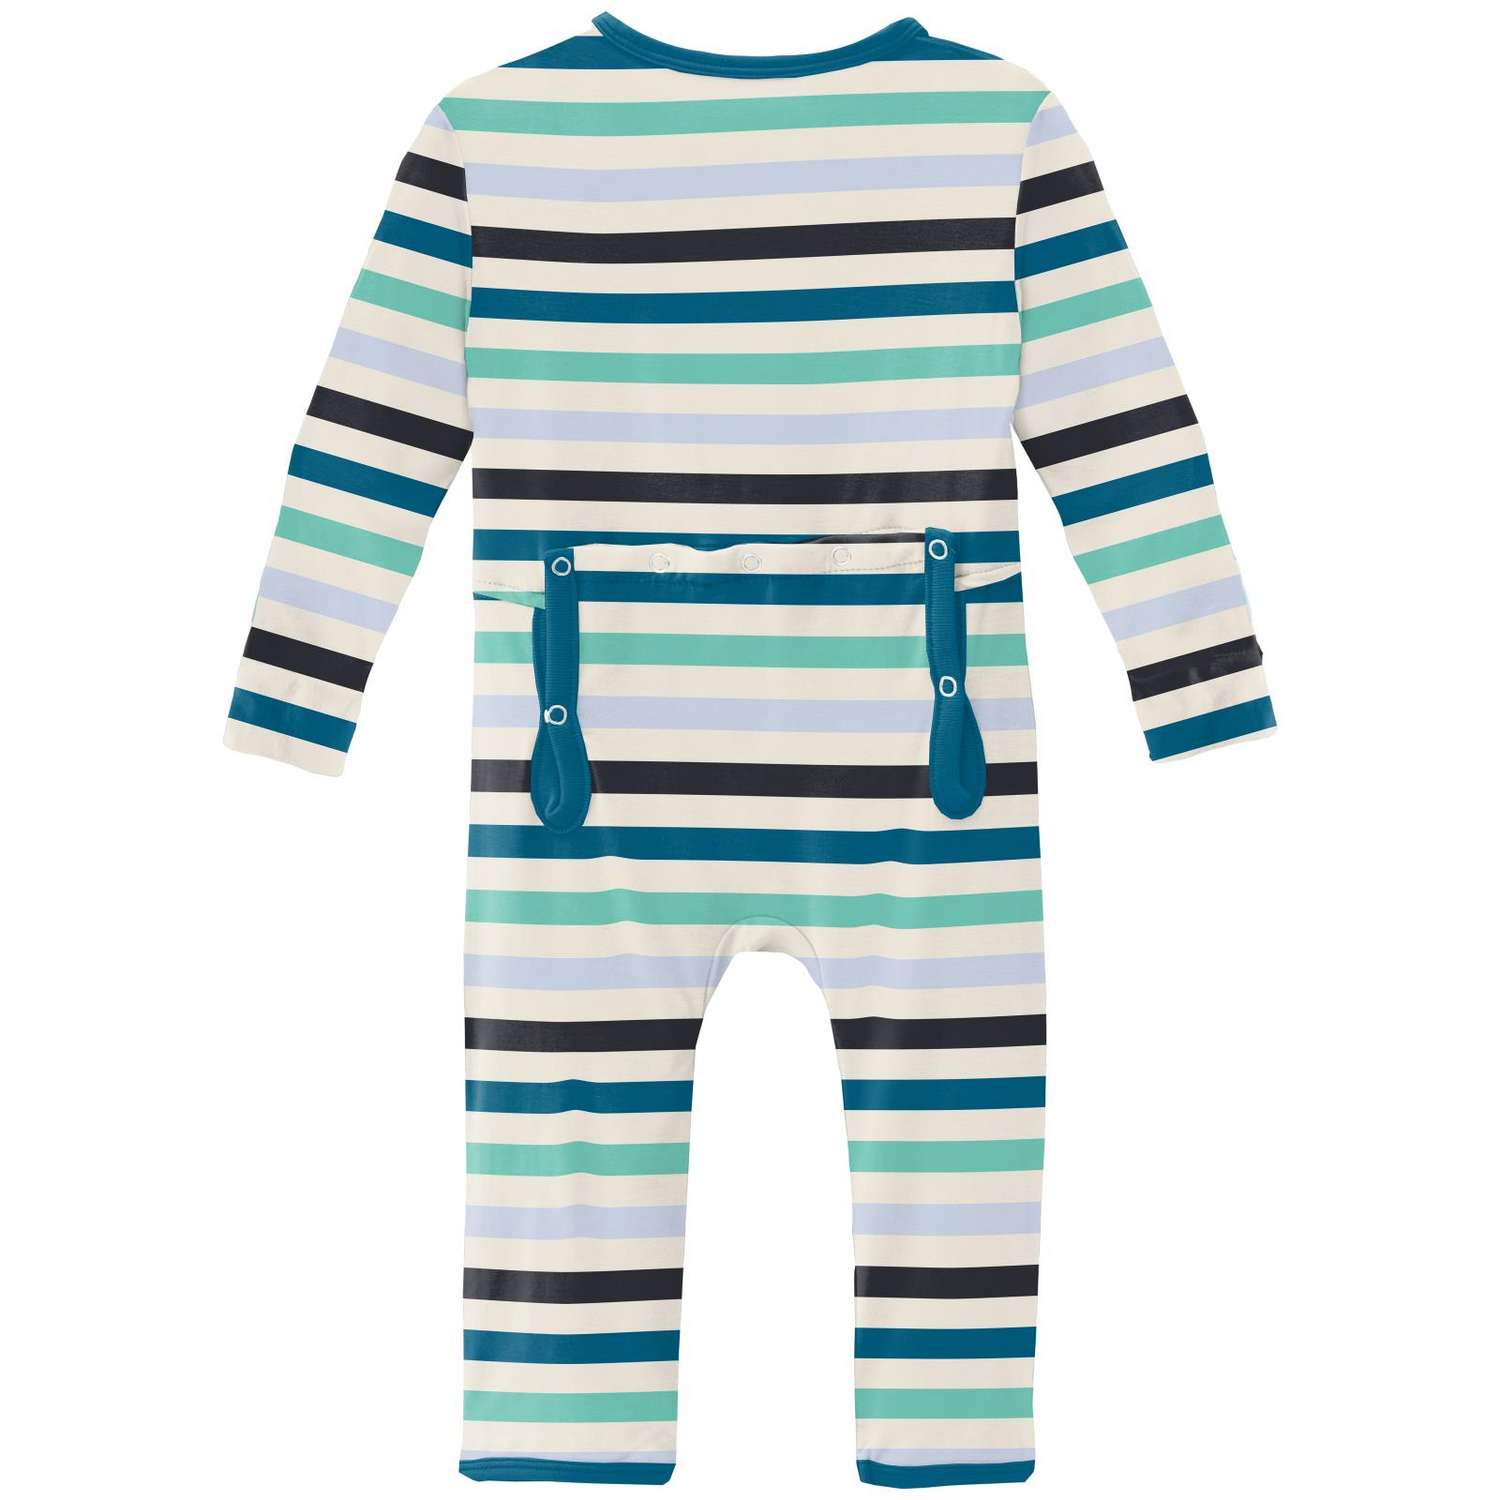 Nashville – Magpies Little Zipper 2 Stripe Blue Way Boy with Print Coverall |